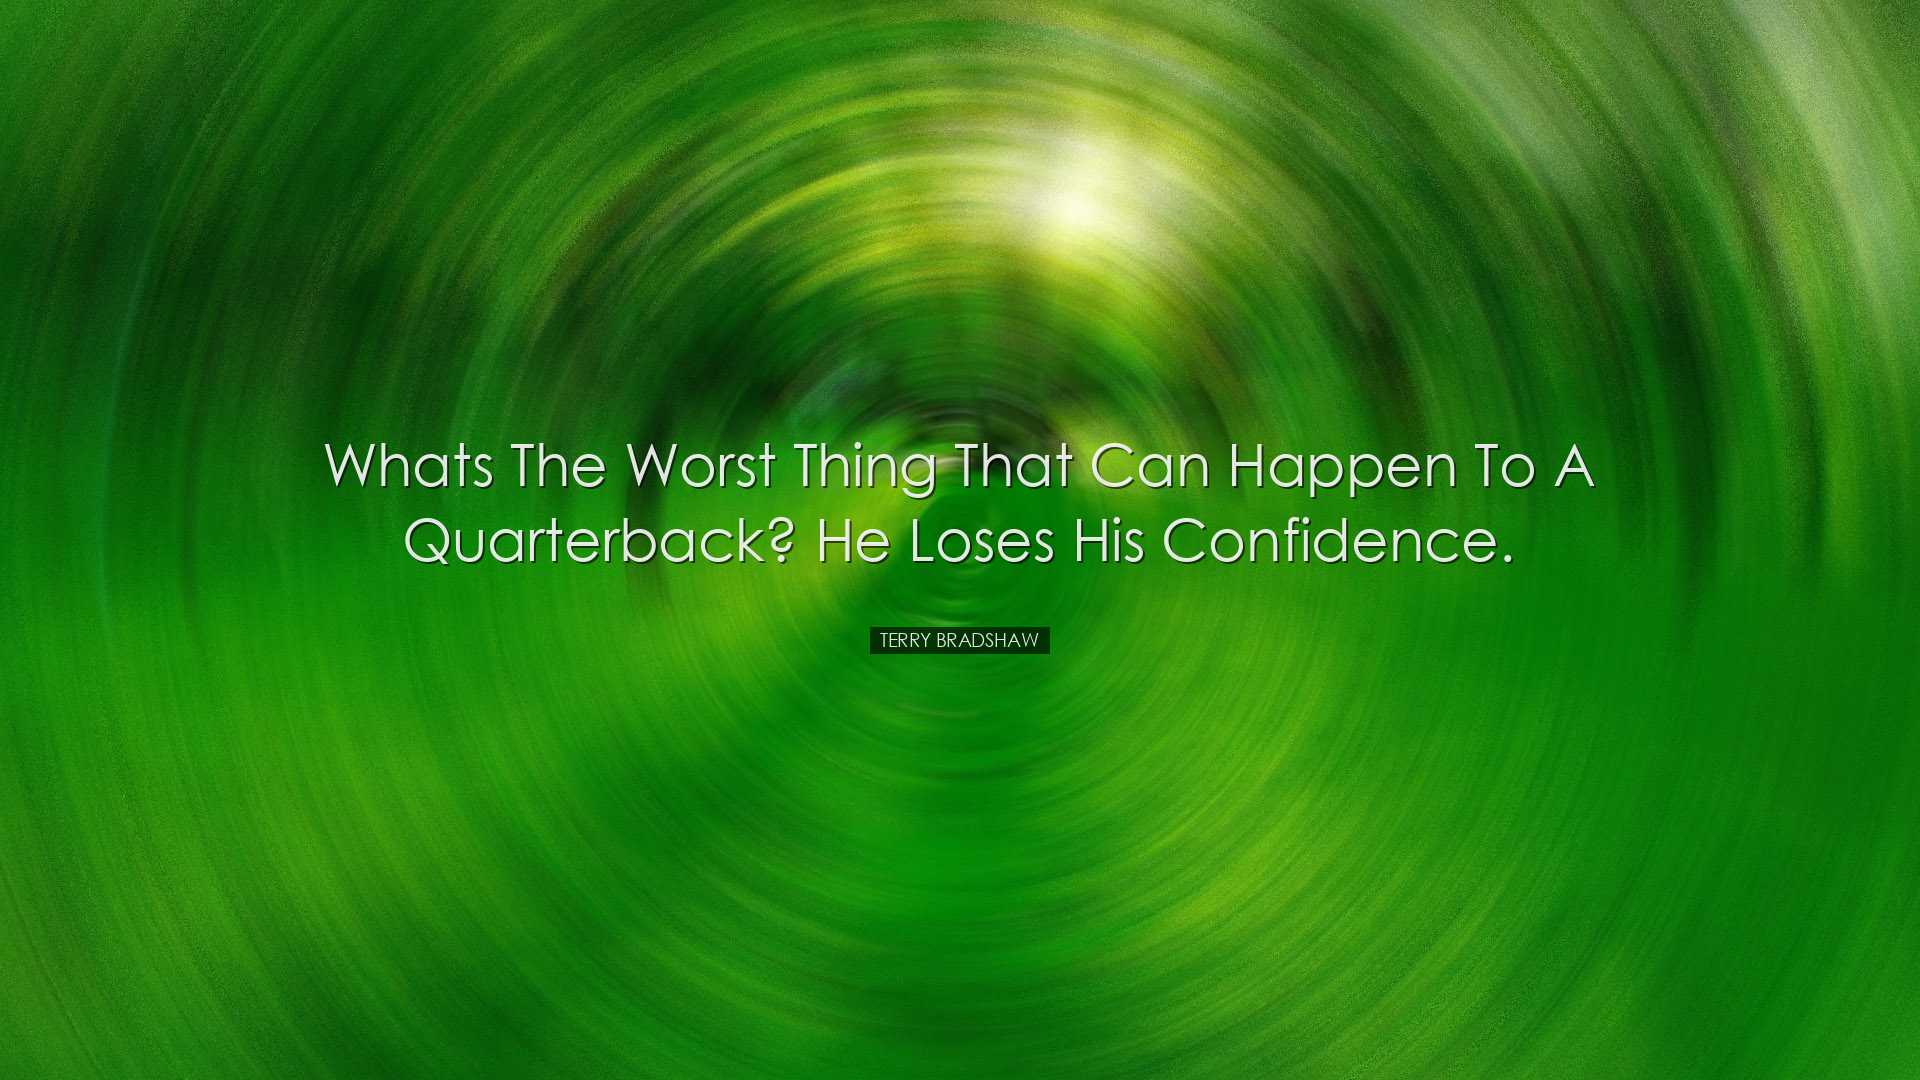 Whats the worst thing that can happen to a quarterback? He loses h